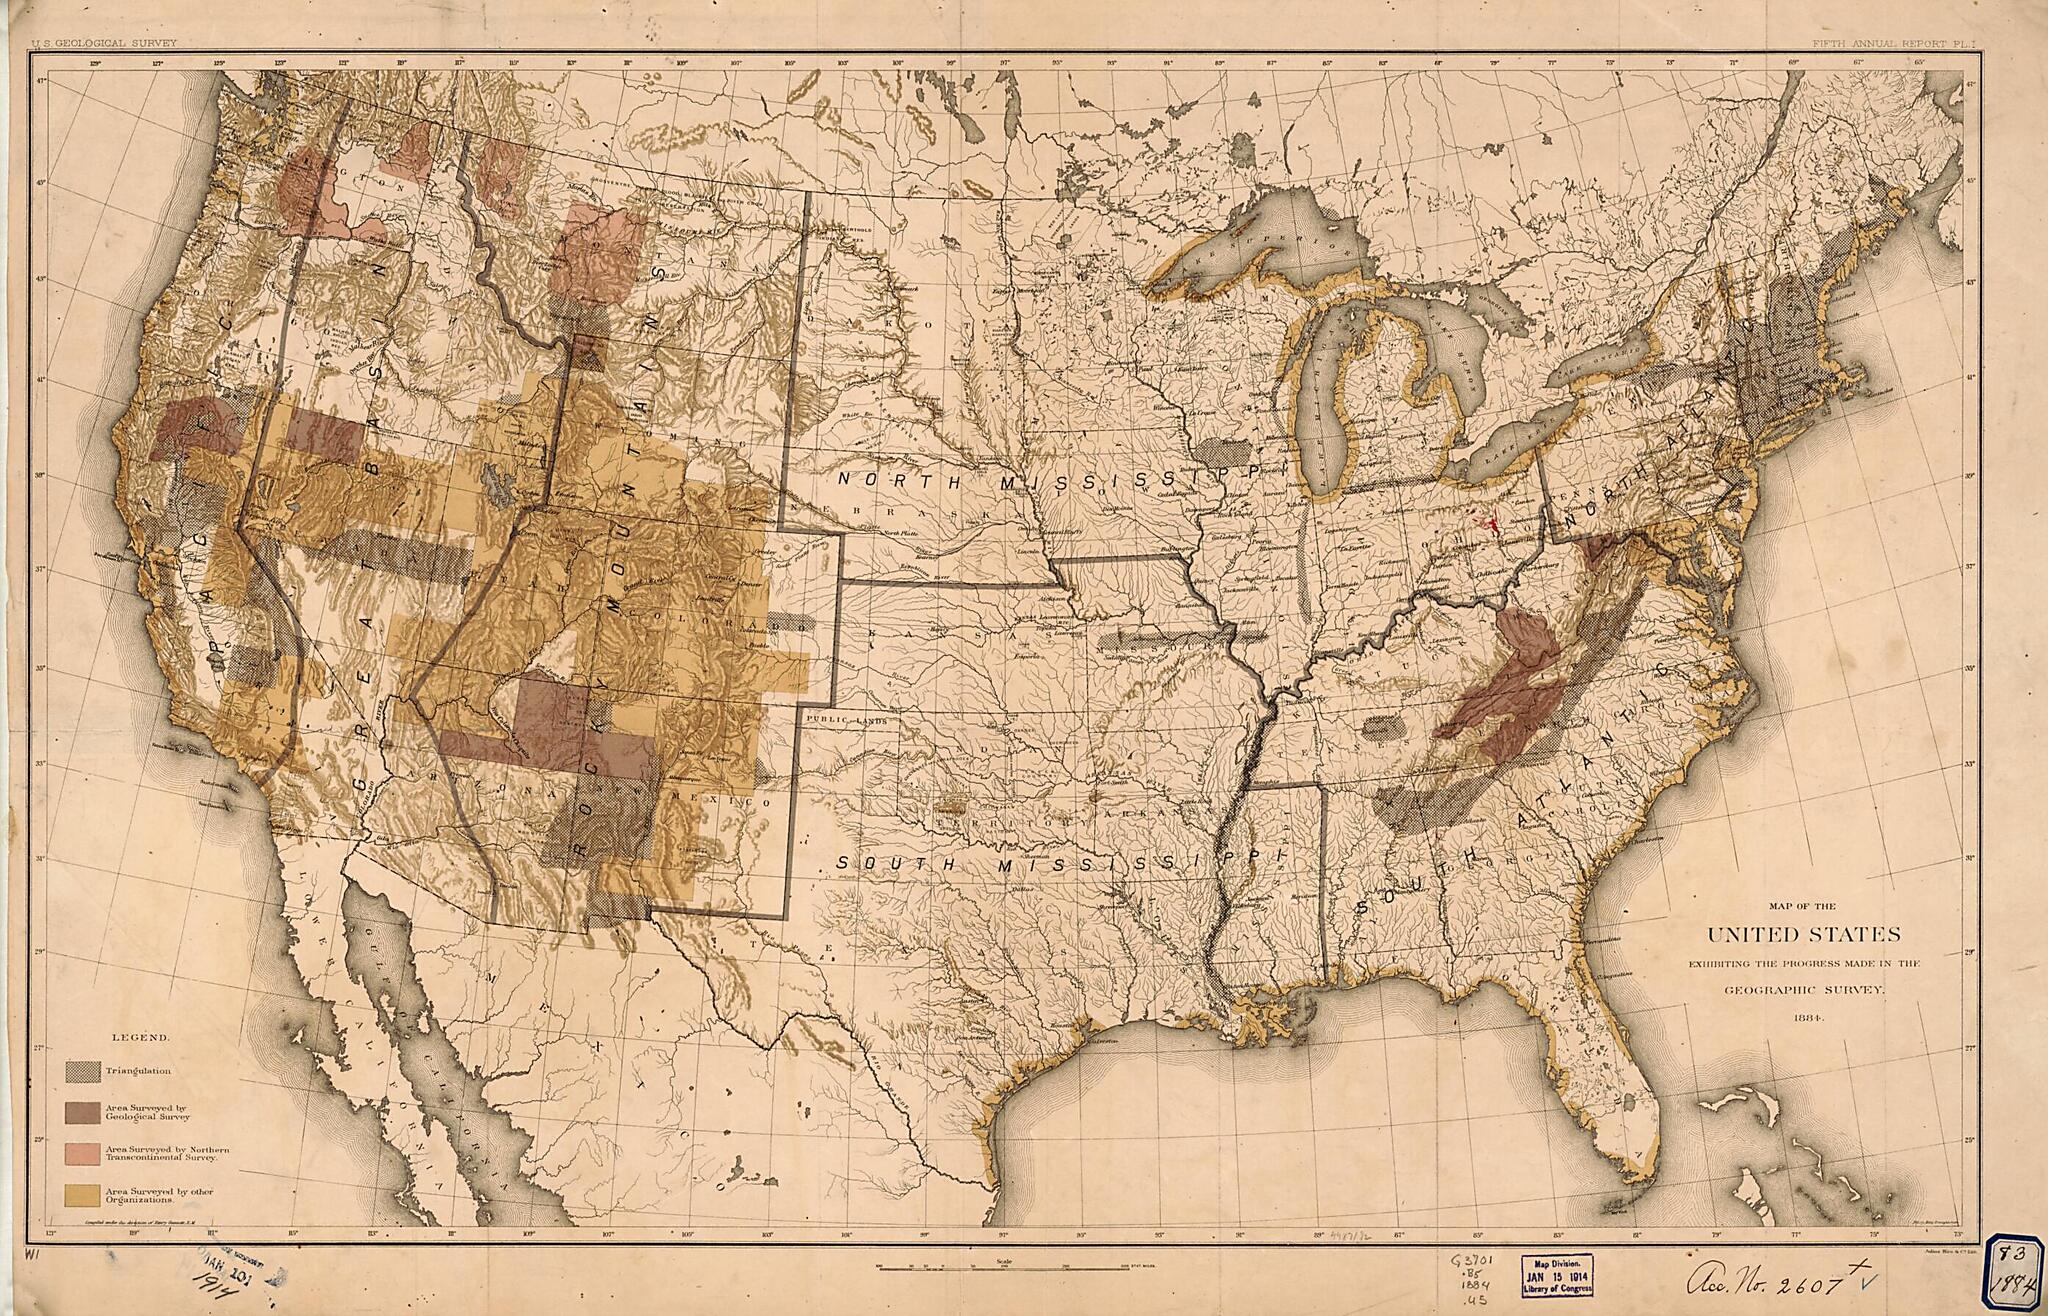 This old map of Map of the United States Showing Progress In Preparation and Engraving of Topographic Maps from 1884 was created by Henry Gannett,  Geological Survey (U.S.) in 1884